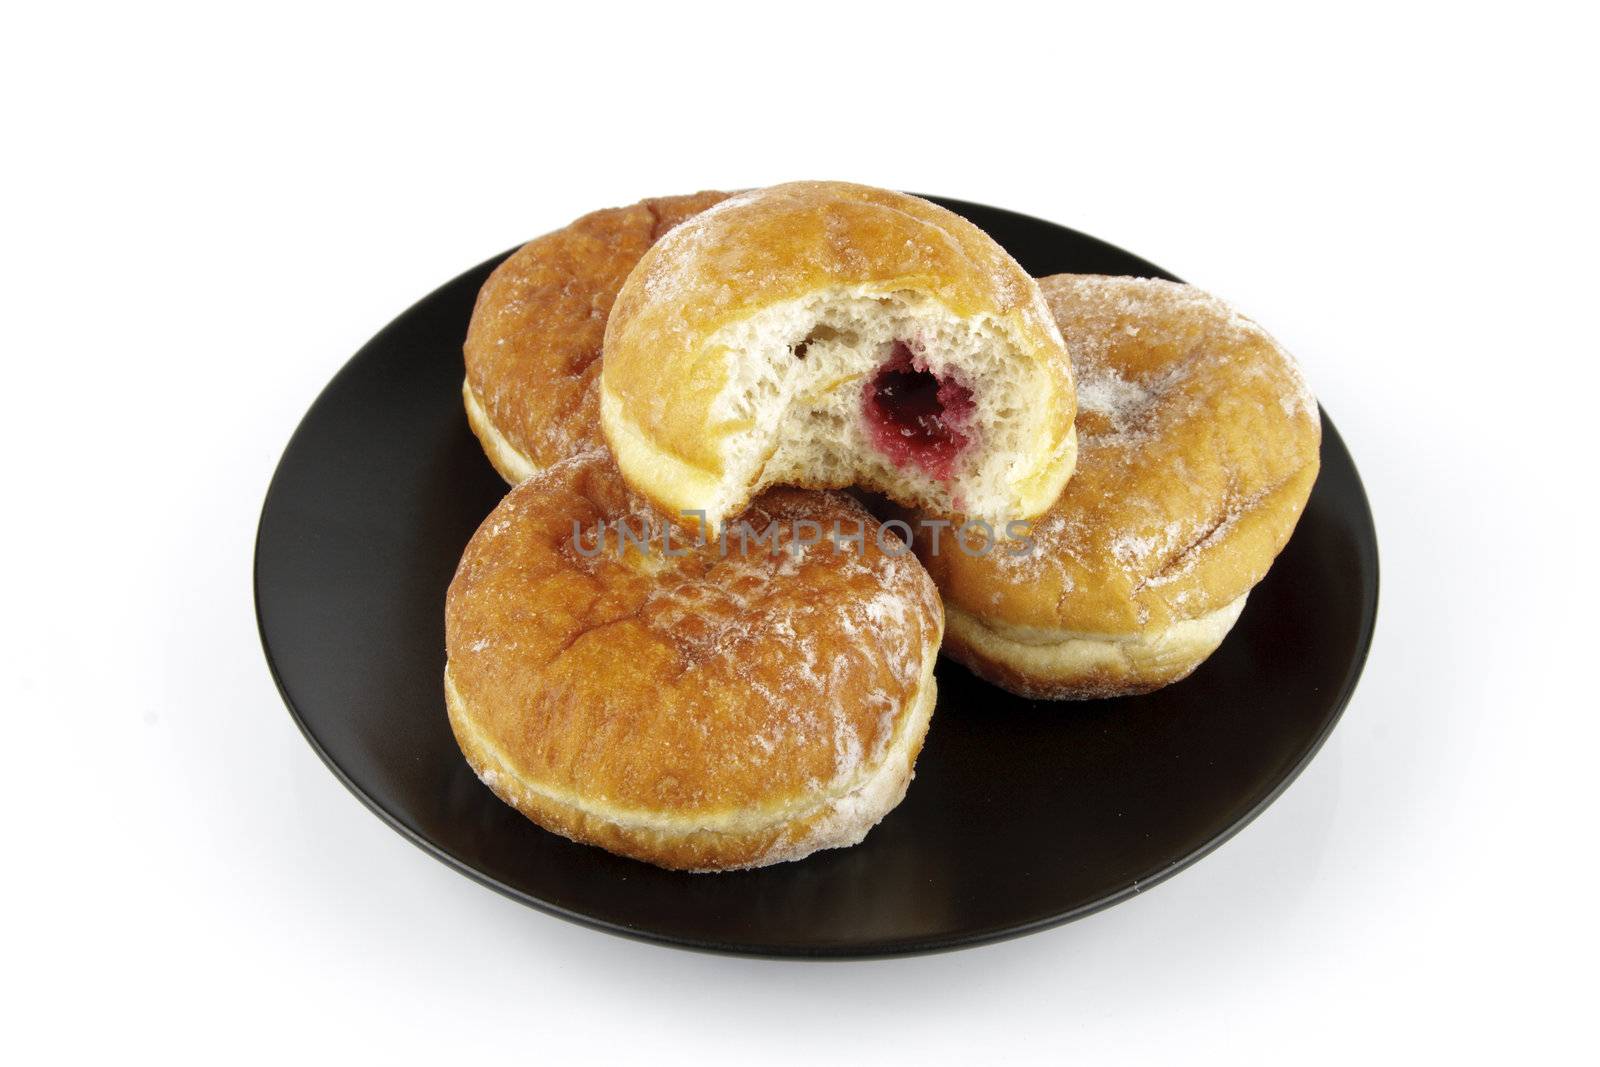 Black round plate of jam doughnuts with a bite mark on one showing red jam on a reflective white background